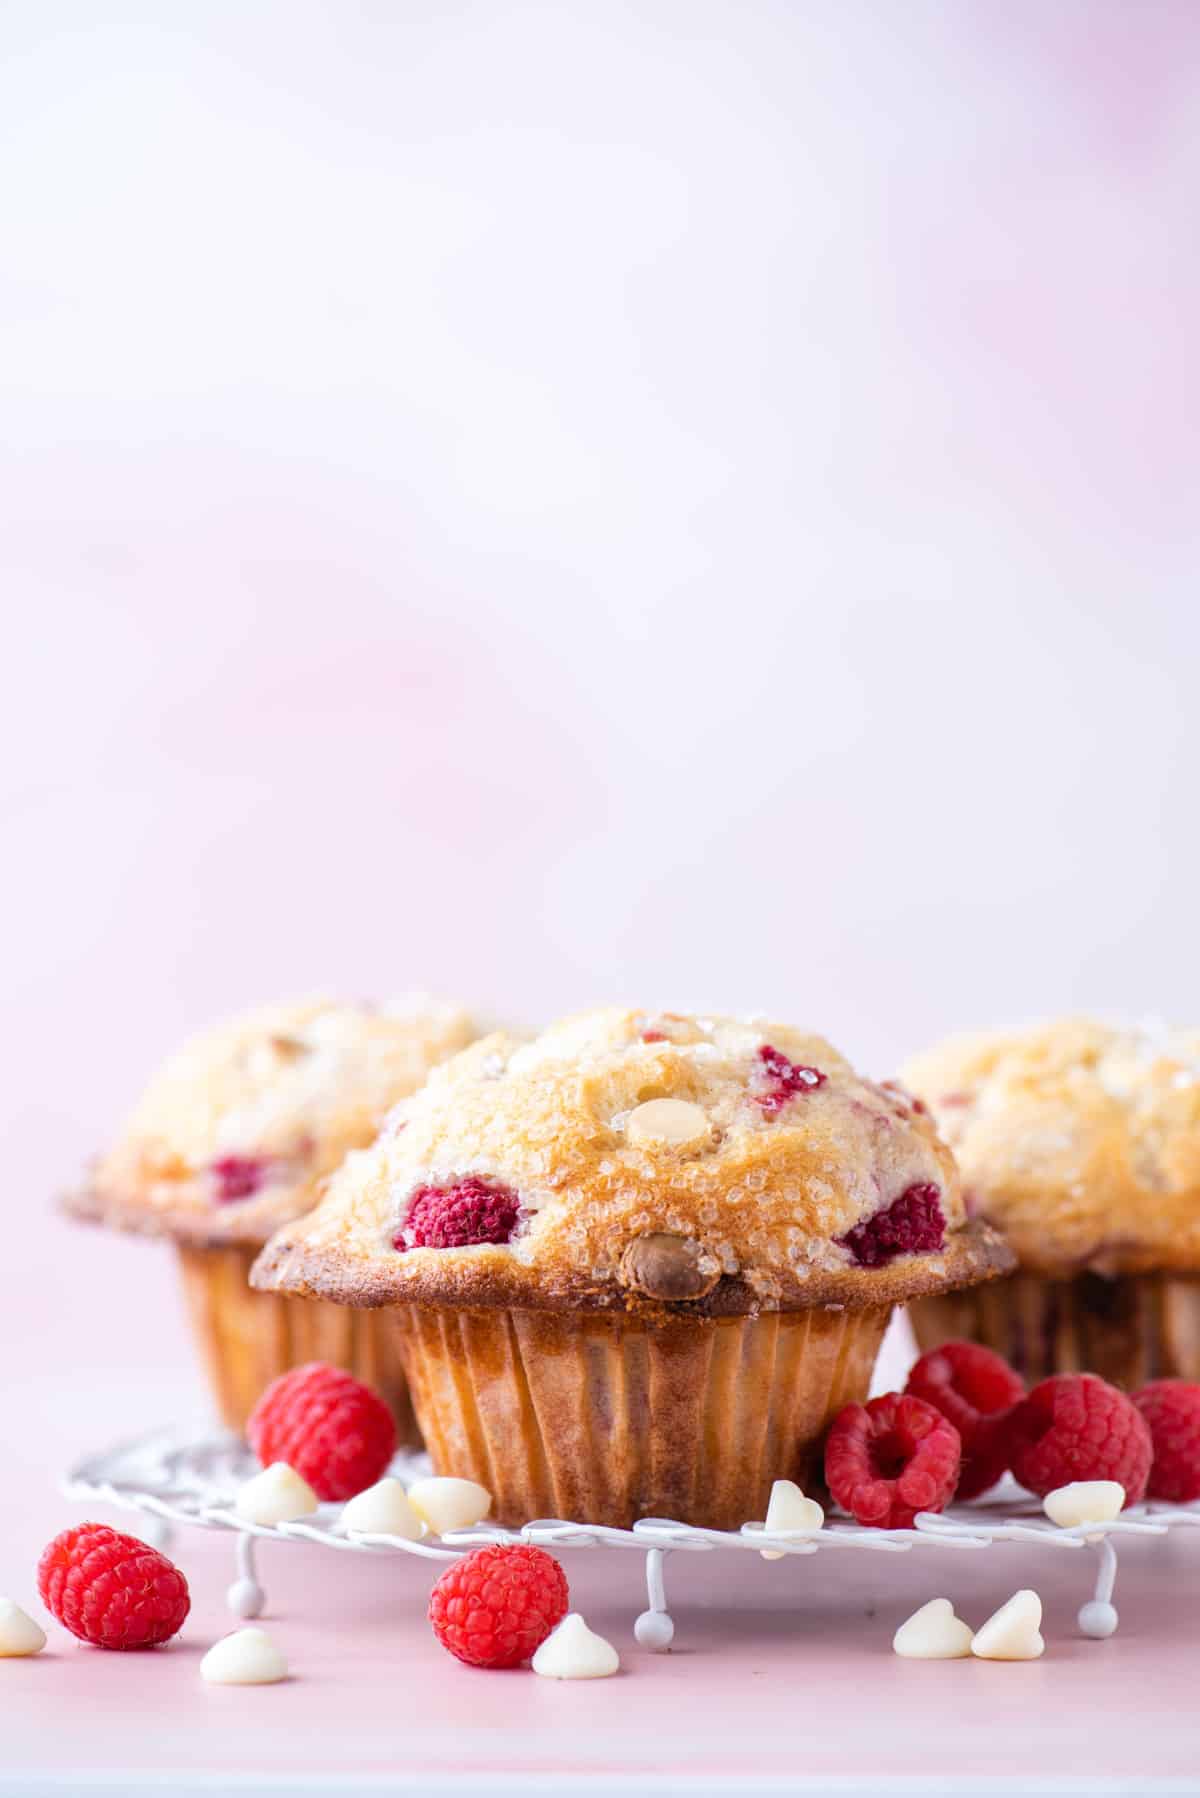 three raspberry white chocolate chip muffins arranged on a white wire rack with fresh raspberries and white chocolate chips sprinkled around them, on a pink surface